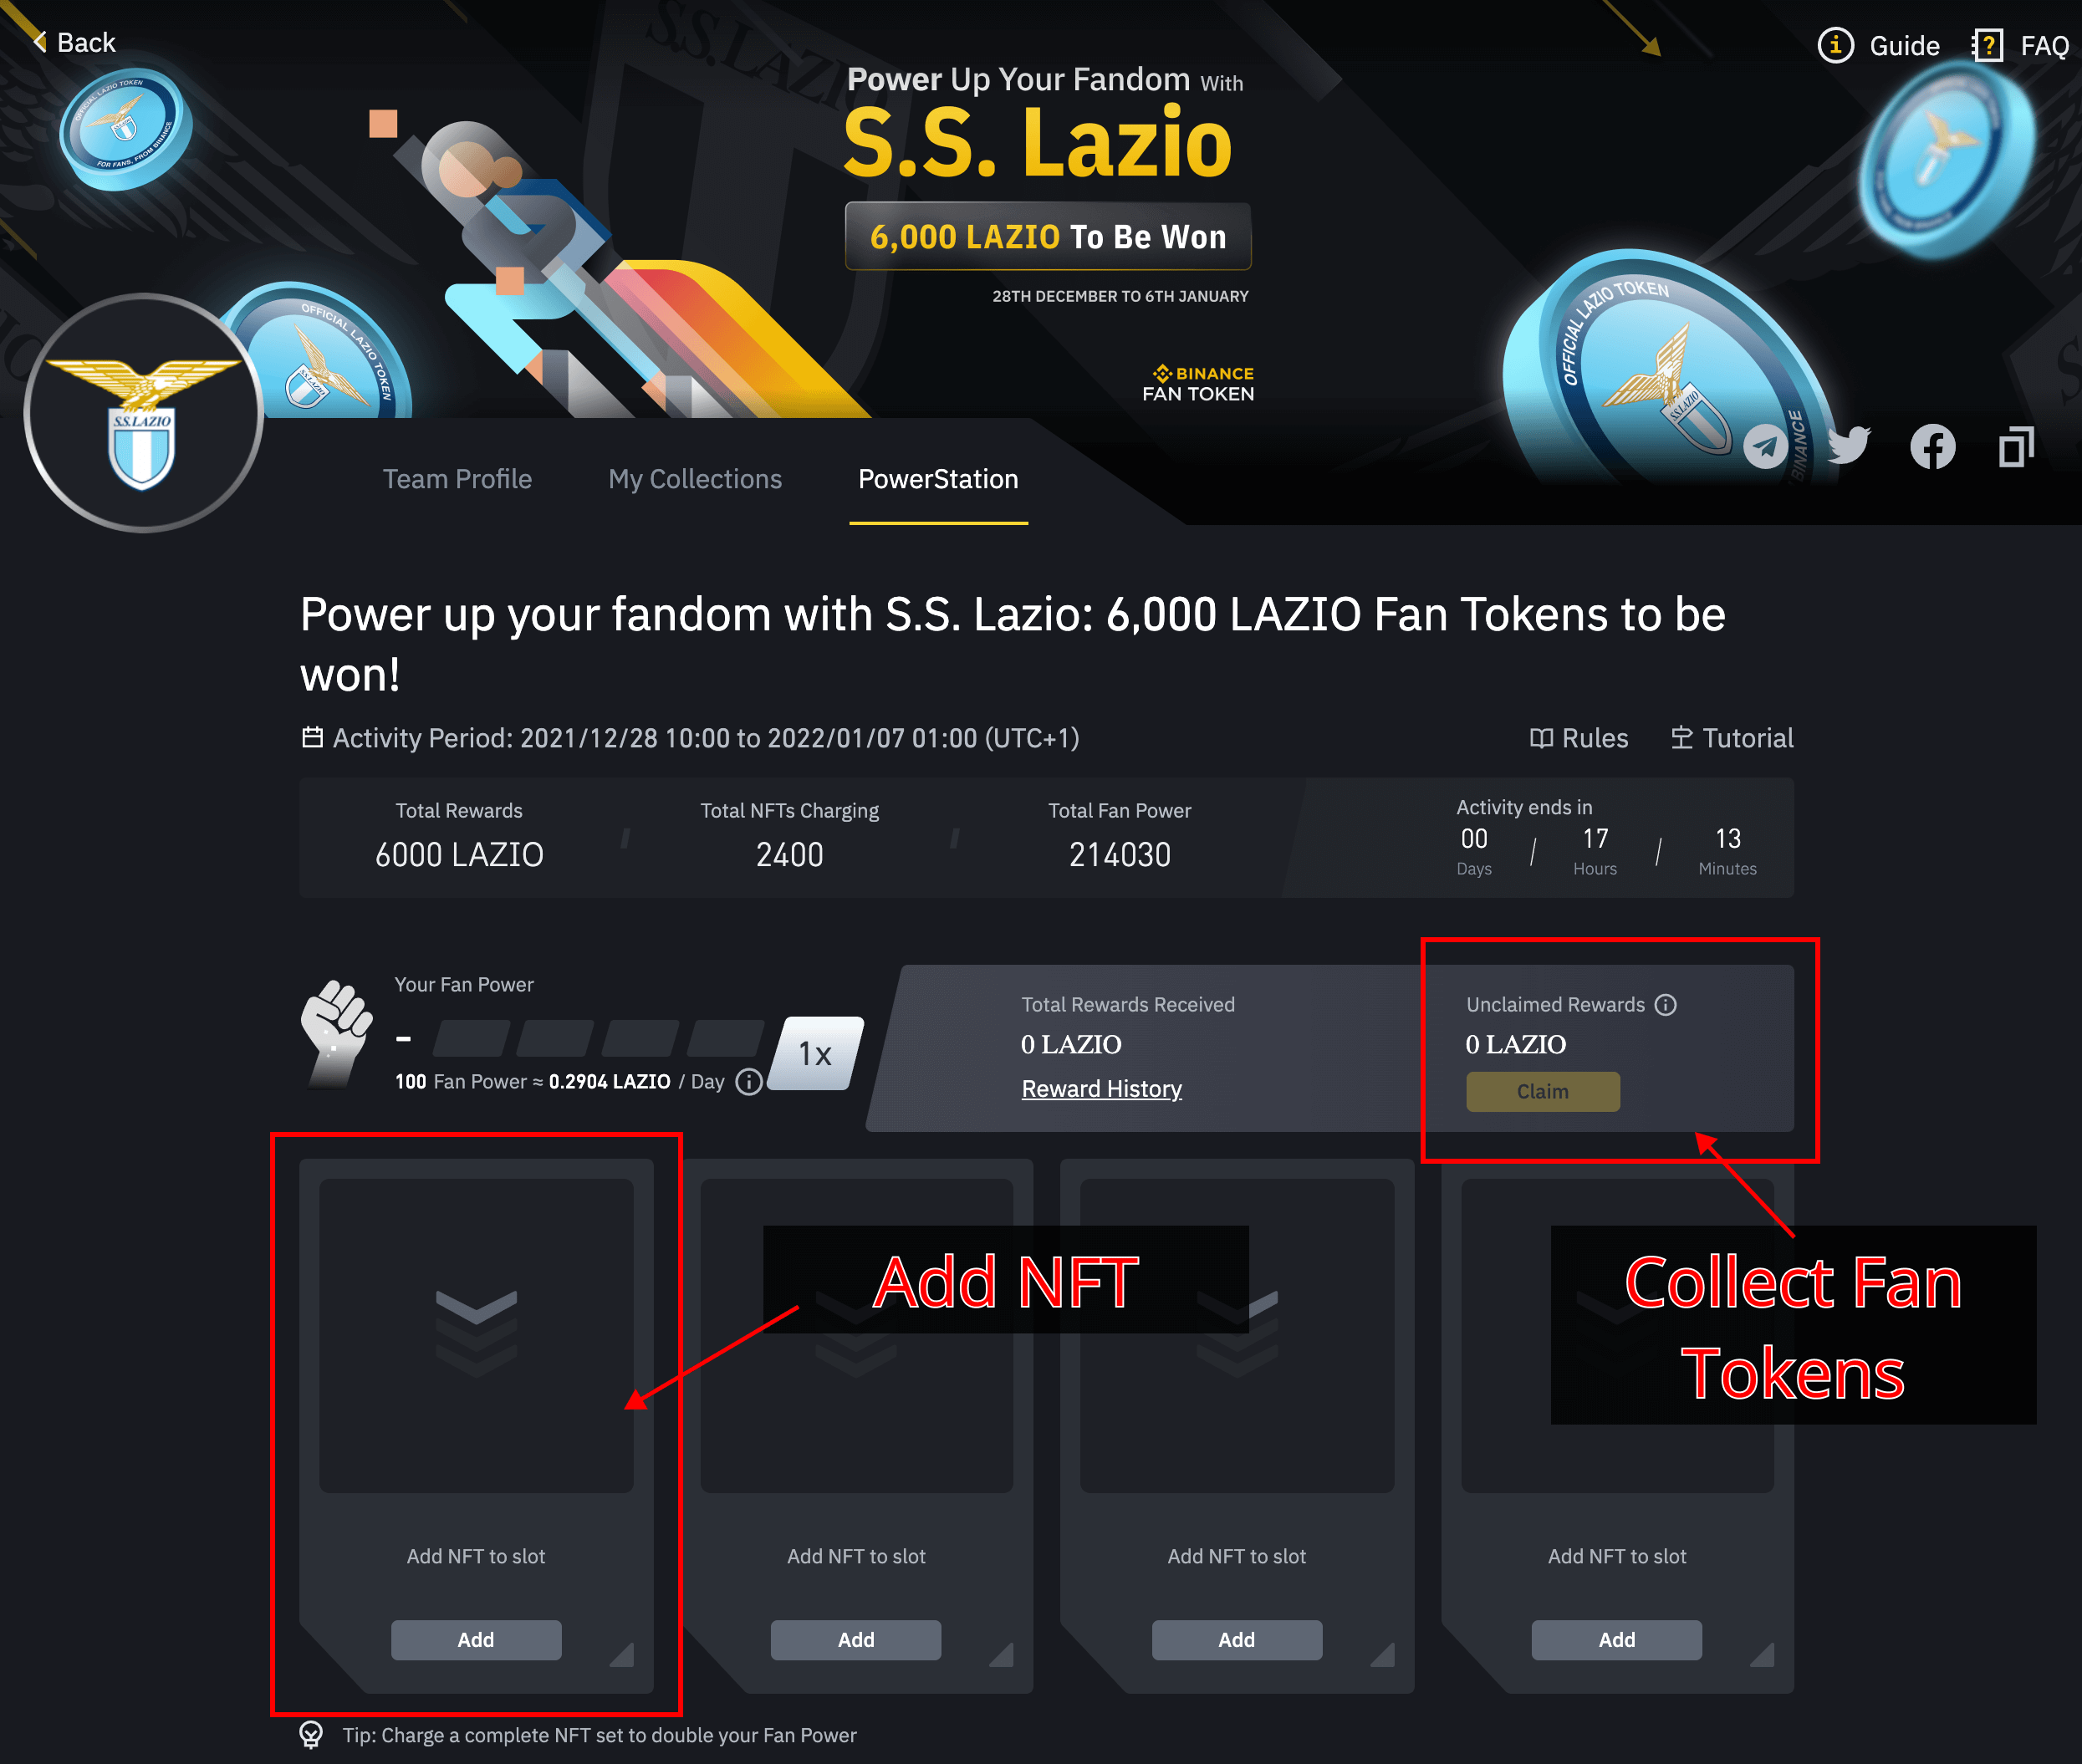 PowerStation for S.S. Lazio. On the platform, users can add their previously purchased NFTs and receive Lazio tokens. The activity expires in 17 hours. A total of 2400 NFTs are deposited and the total fan power is 214030.